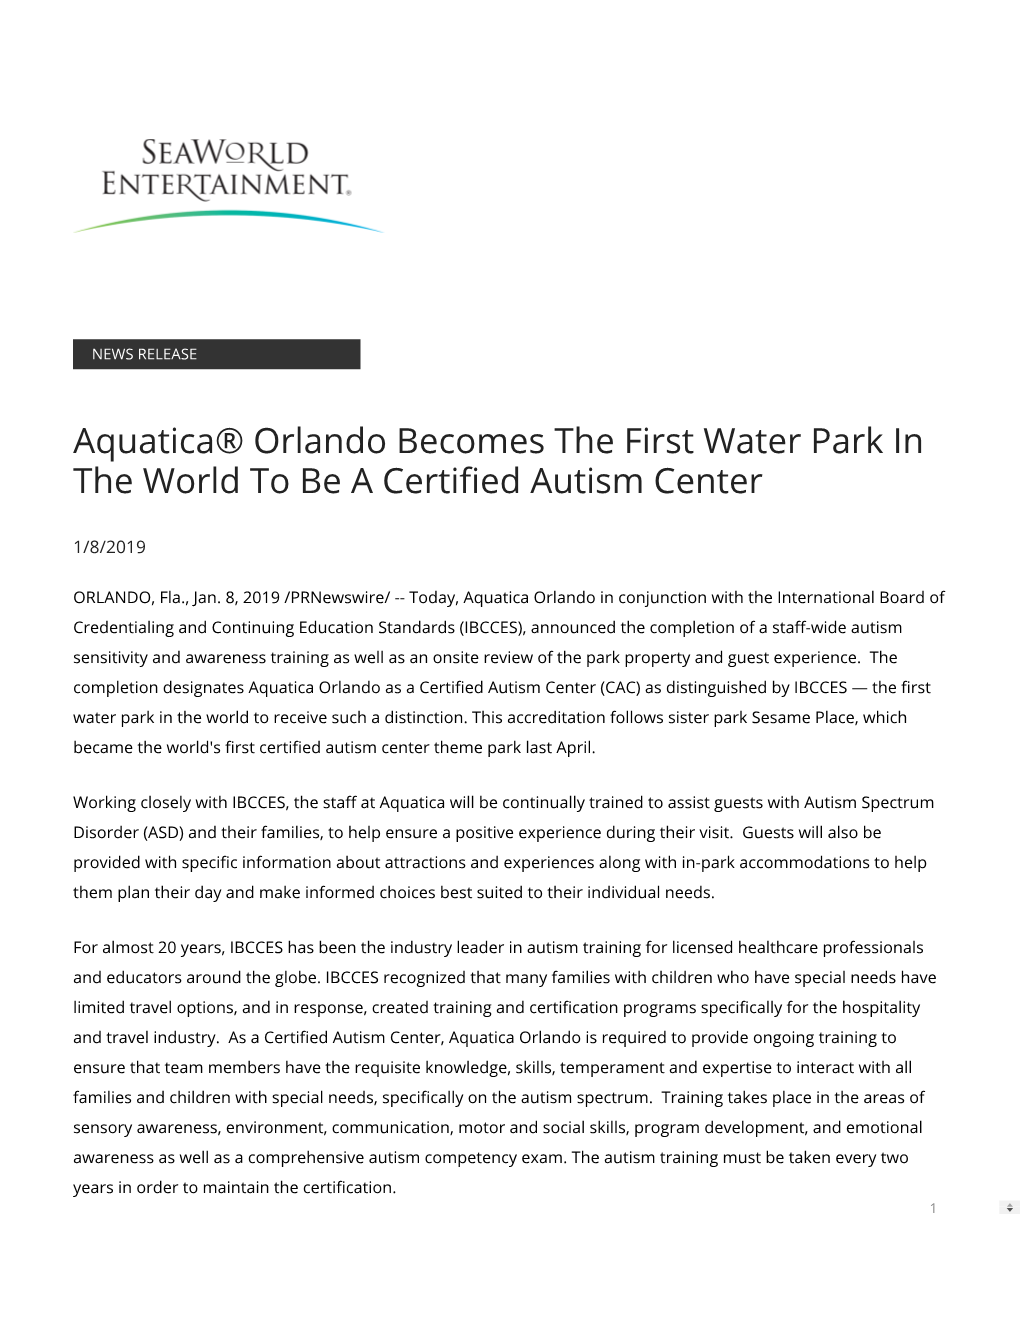 Aquatica® Orlando Becomes the First Water Park in the World to Be a Certi�Ed Autism Center